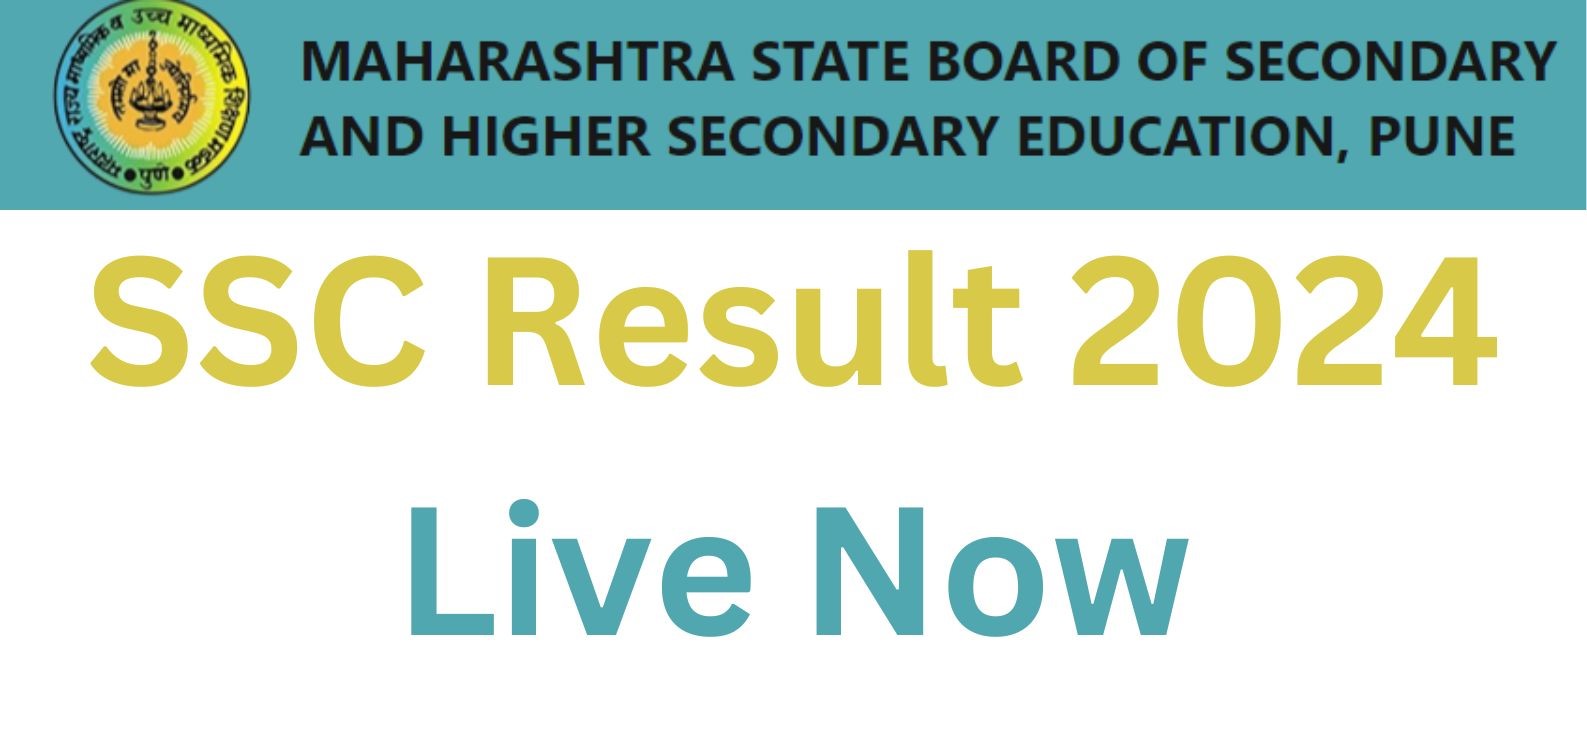 SSC Result 2024 Maharashtra Board Is Live Now: Check Your Result Today